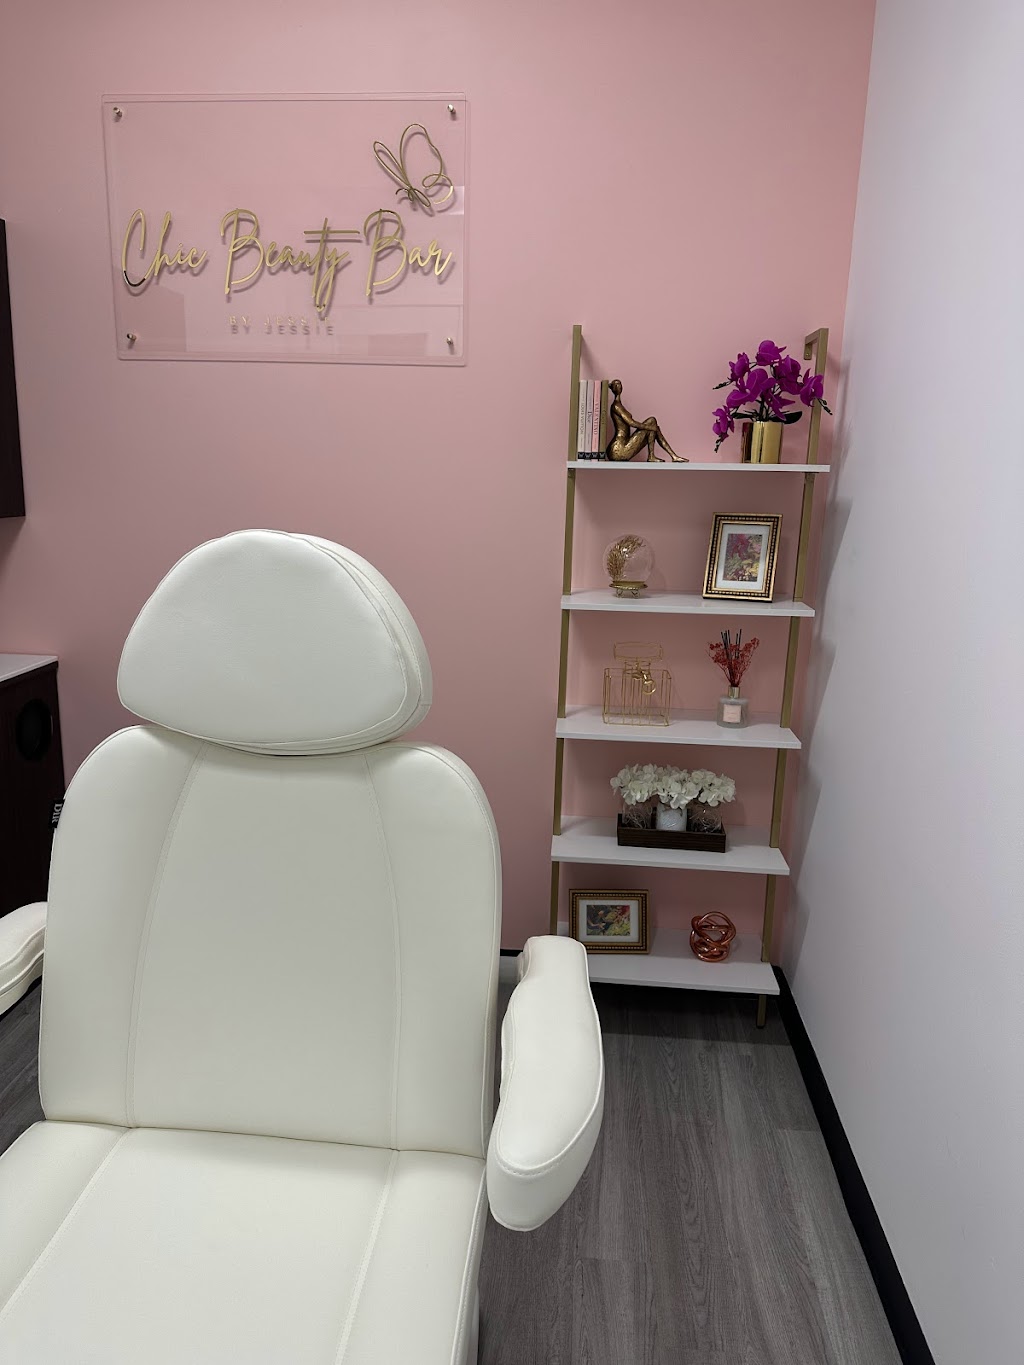 Chic Beauty Bar | 473 River Rd Suite 133, Edgewater, NJ 07020 | Phone: (347) 344-7286